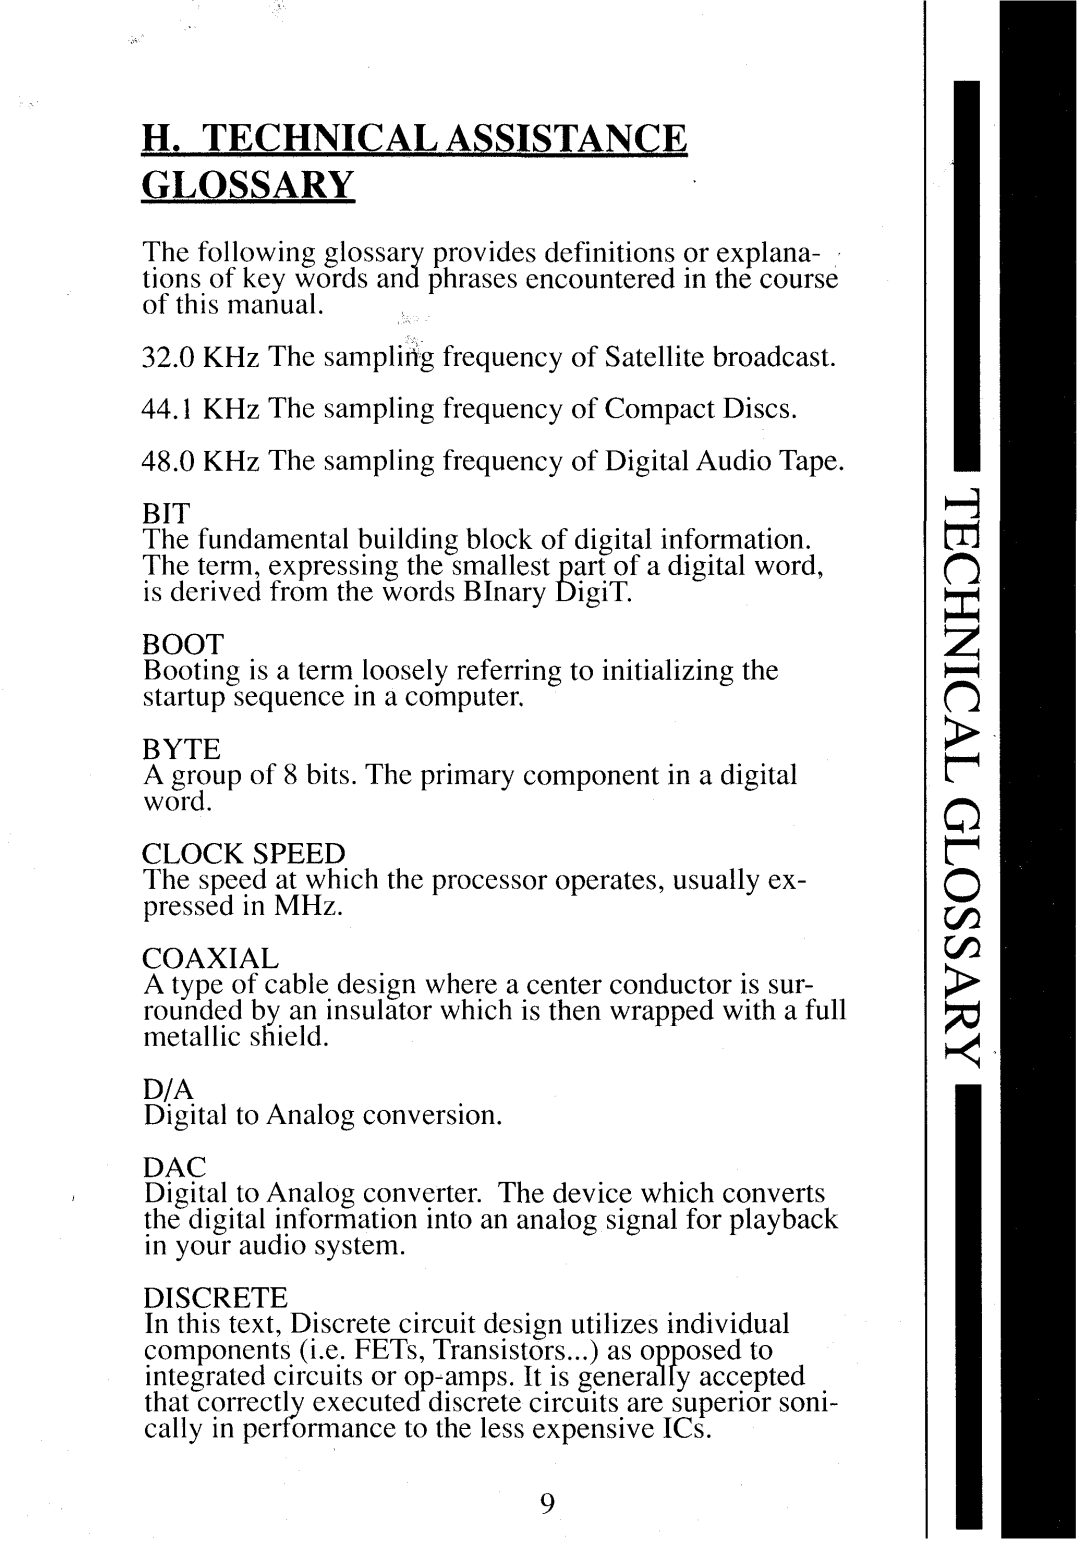 Krell Industries SBP-32X manual H.Technical Assistance Glossary 